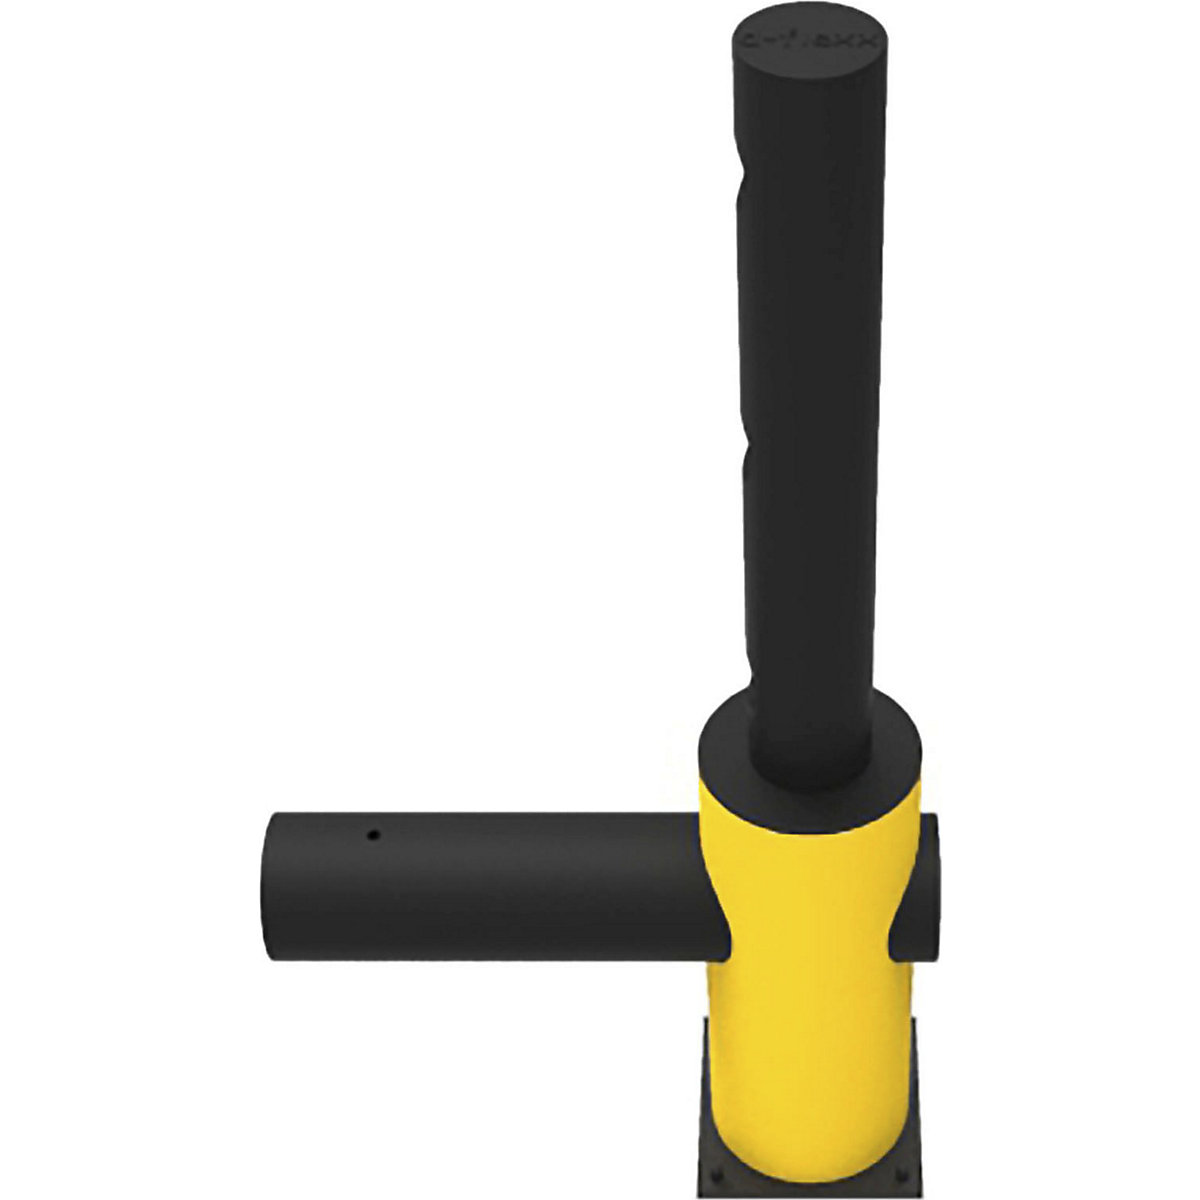 ECHO traffic barrier, made of flexible plastic, end posts